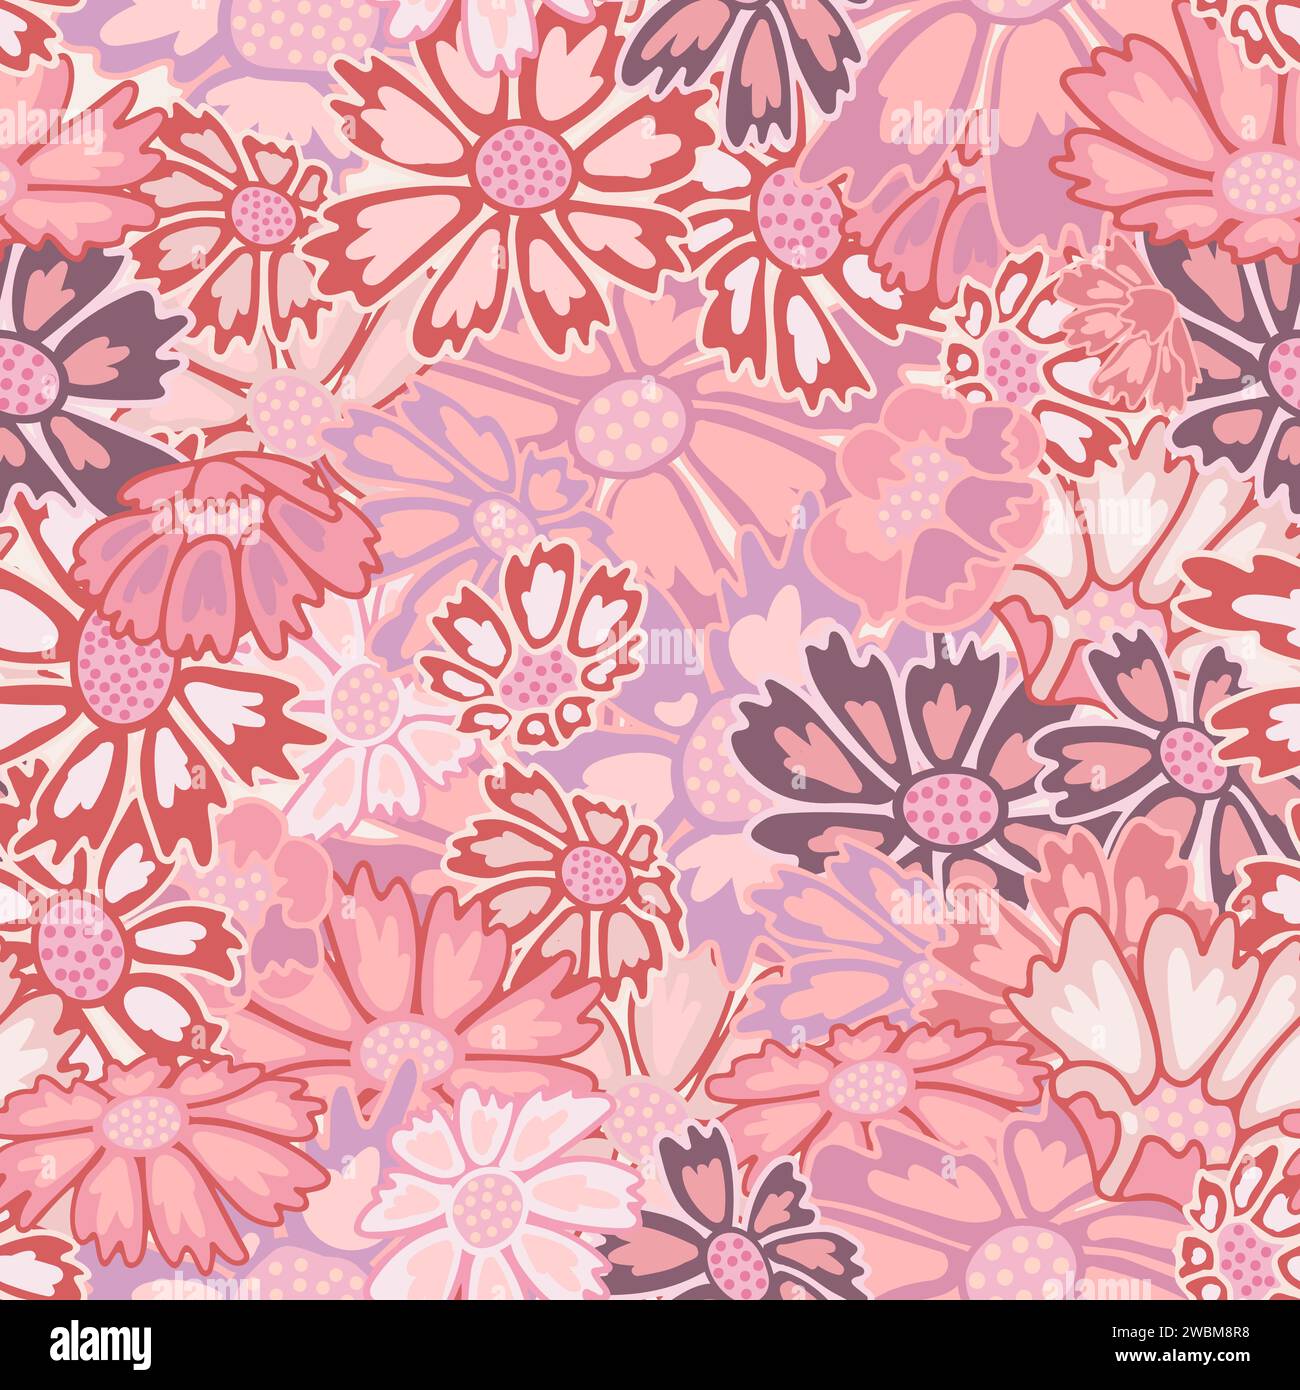 Pink floral pattern on a pink background. Contrasted playful ornate design. Allover scattered layered repeat. Stock Vector